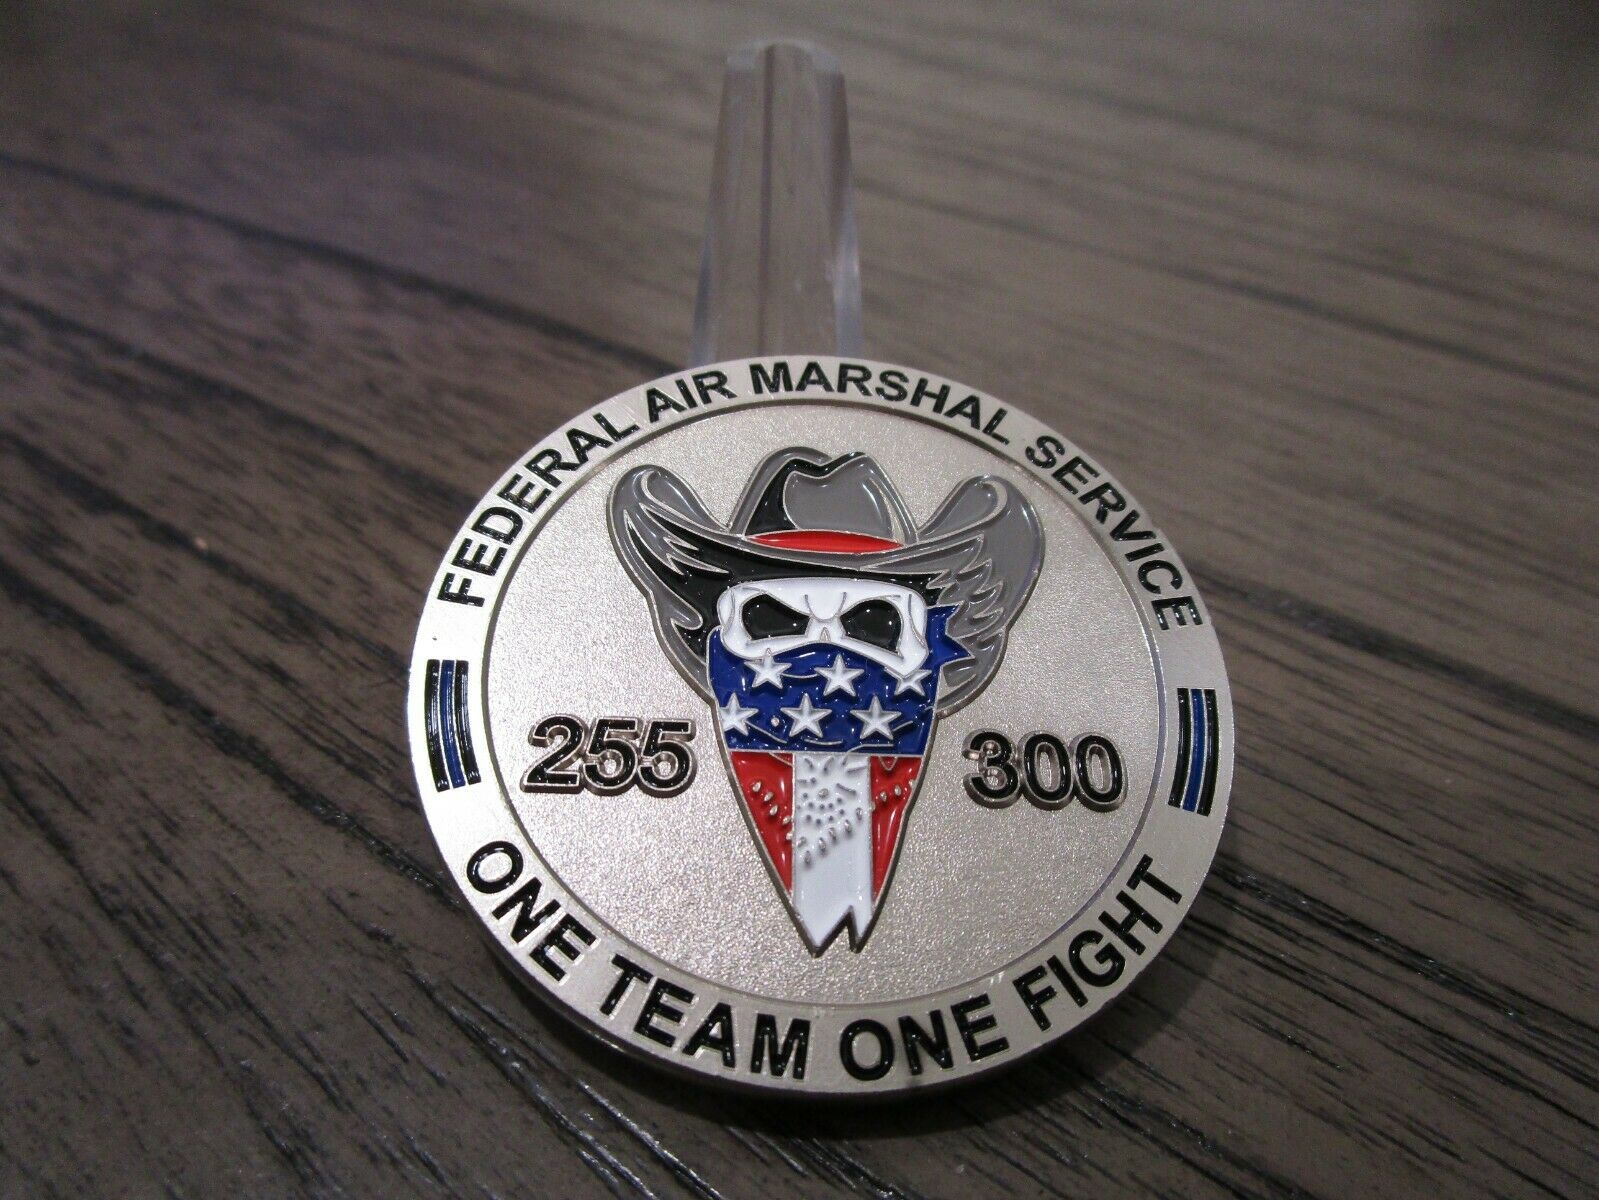 Federal Air Marshal One Team One Fight Western Masked Skull Challenge Coin